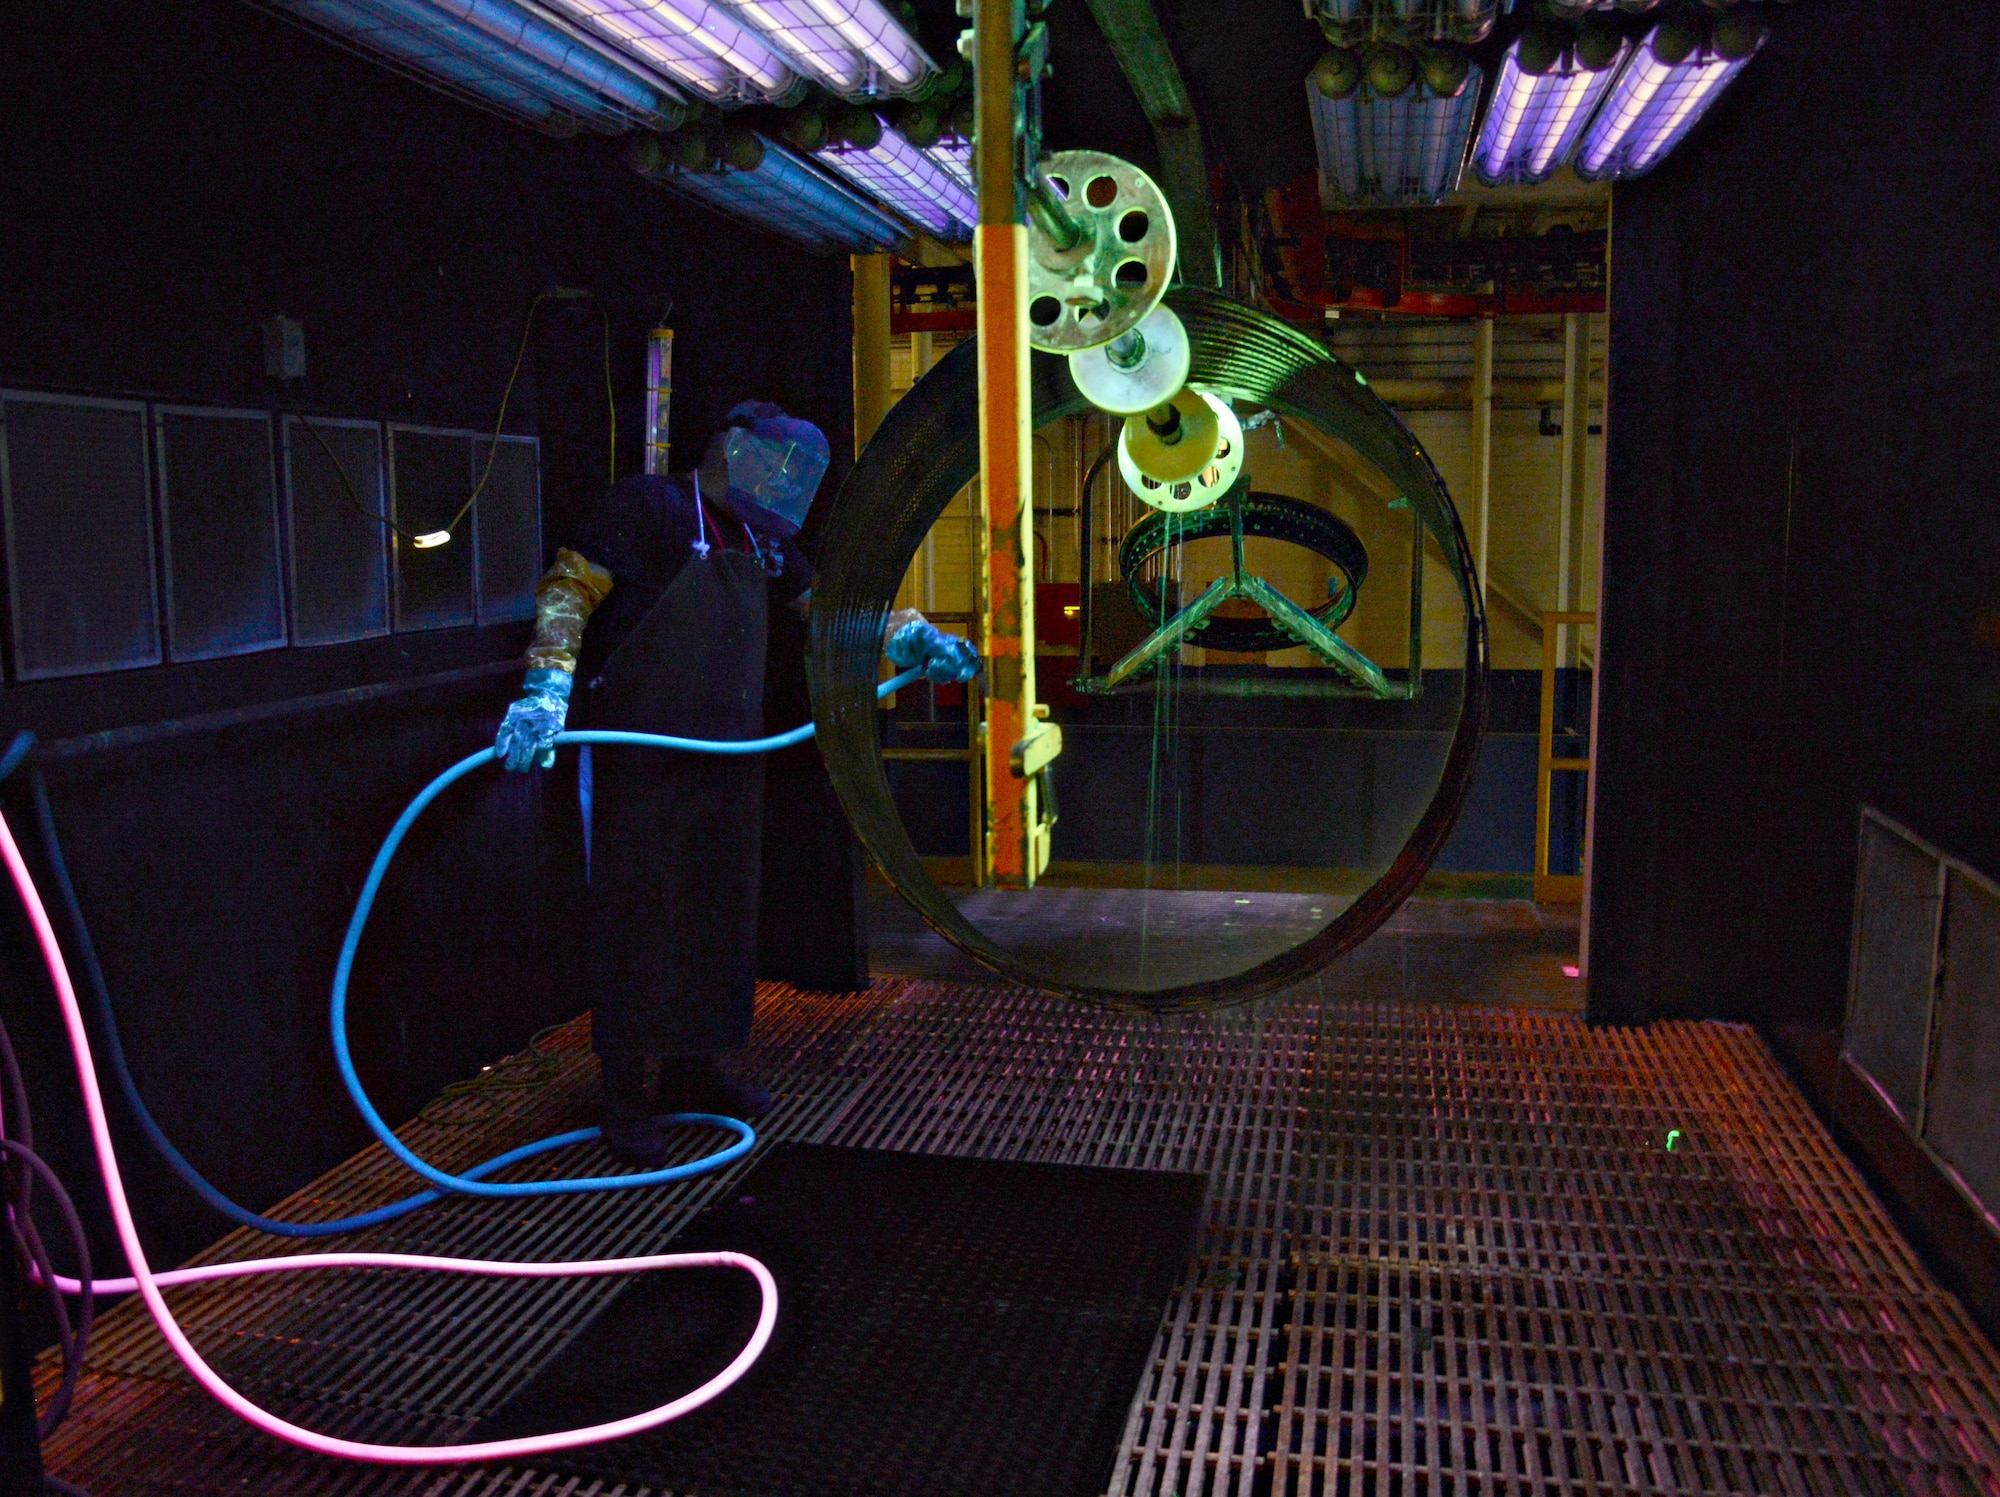 Tracy McGehee, a fluorescent penetrant inspector with the 548th Propulsion Maintenance Squadron, rinses a florescent penetrant wash off of a liner duct for a combustion chamber off of an F101 engine in a bay in his shop area. After the part has been thoroughly rinsed and dried, it will be sent to the blacklight room, where inspectors will be able to quickly detect any compromises or cracks under a black light. (Air Force photo by Kelly White/Released)